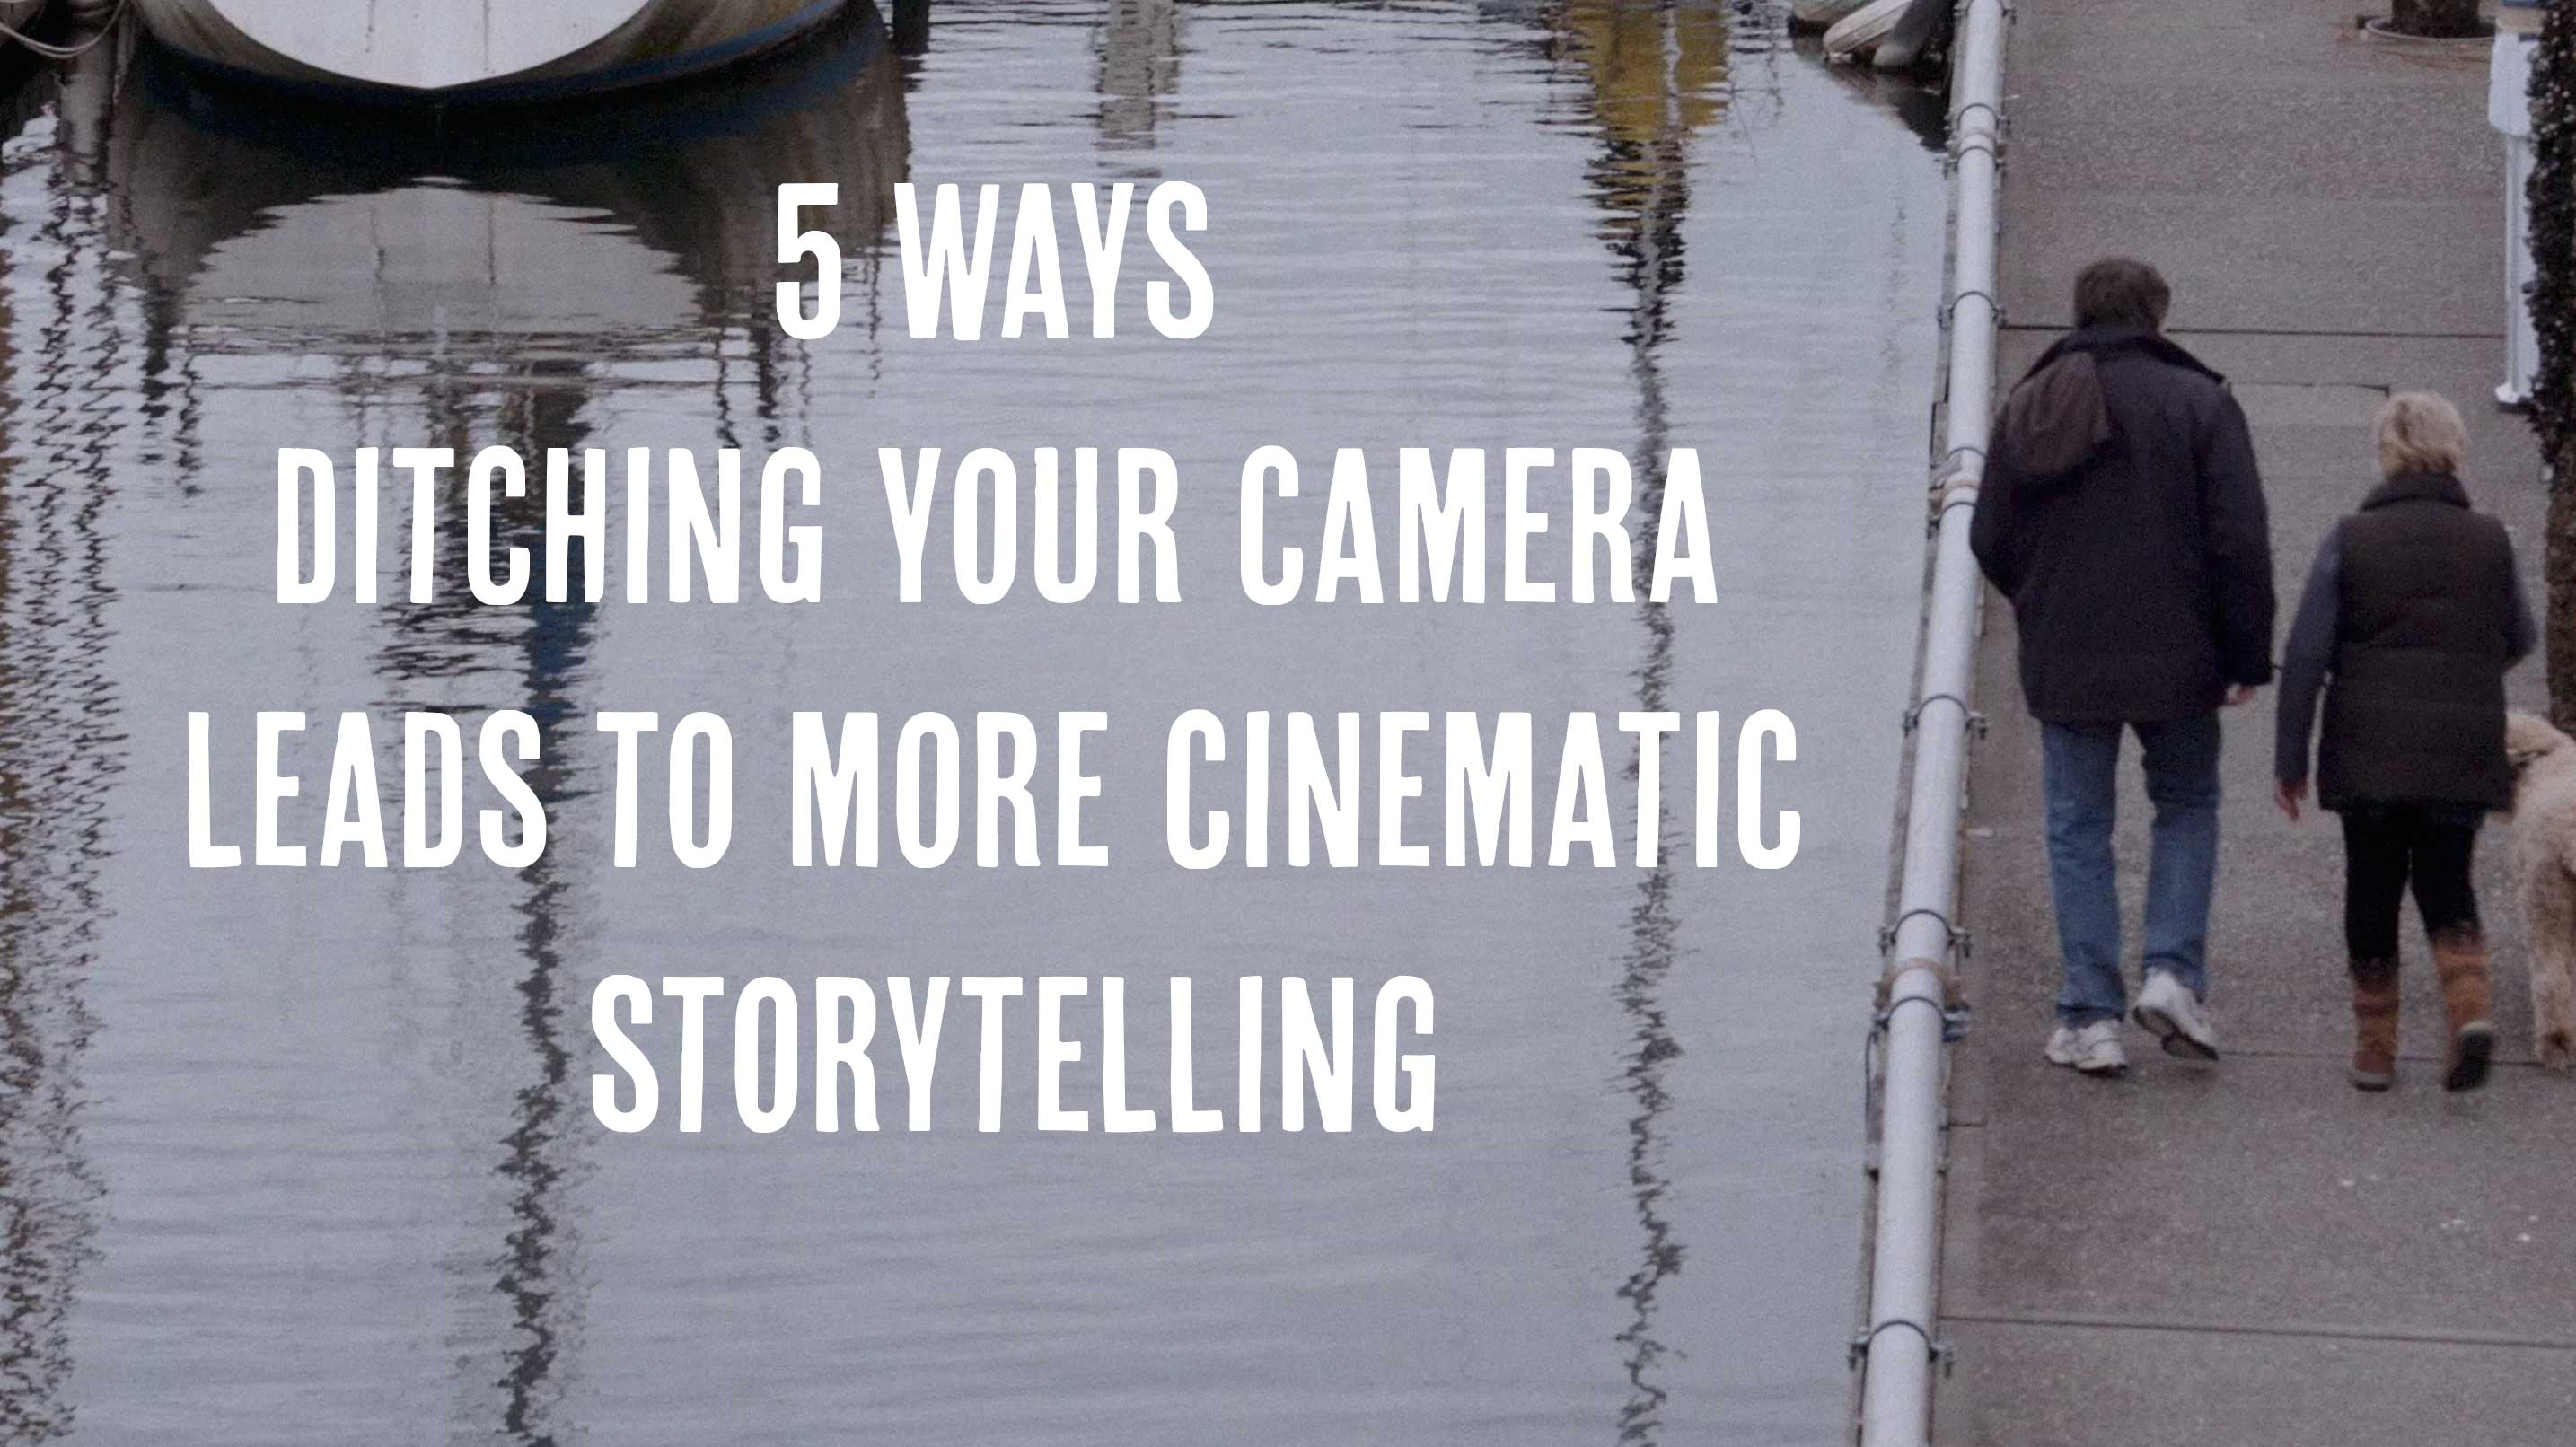 5 ways ditching your camera leads to more cinematic storytelling